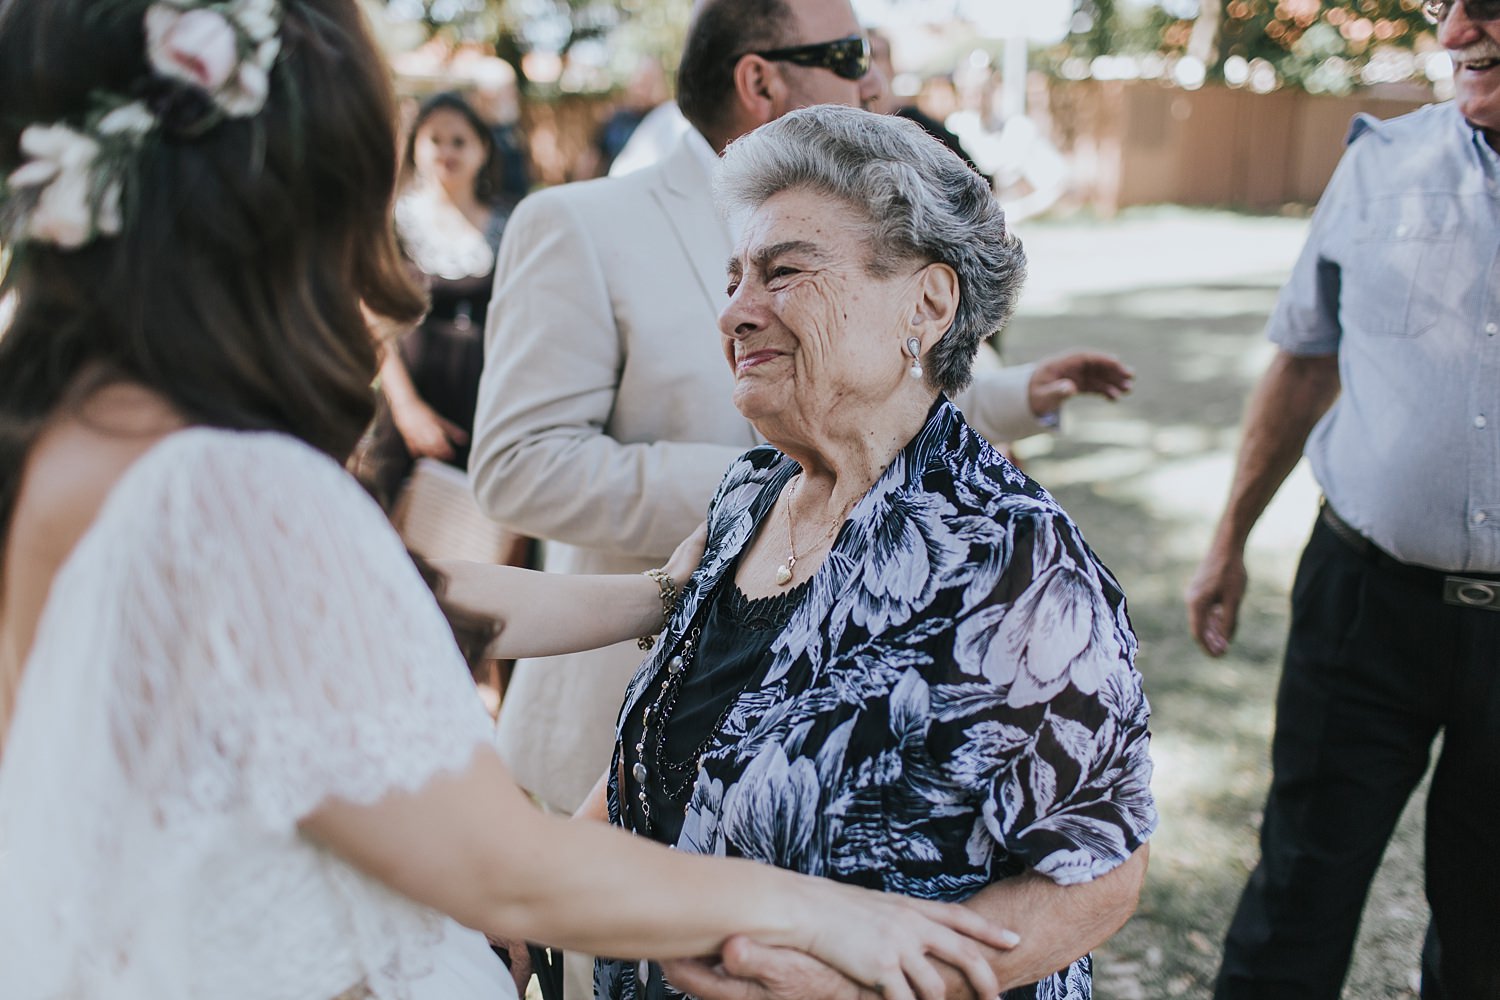 bride being congratulated by nonna after the ceremony